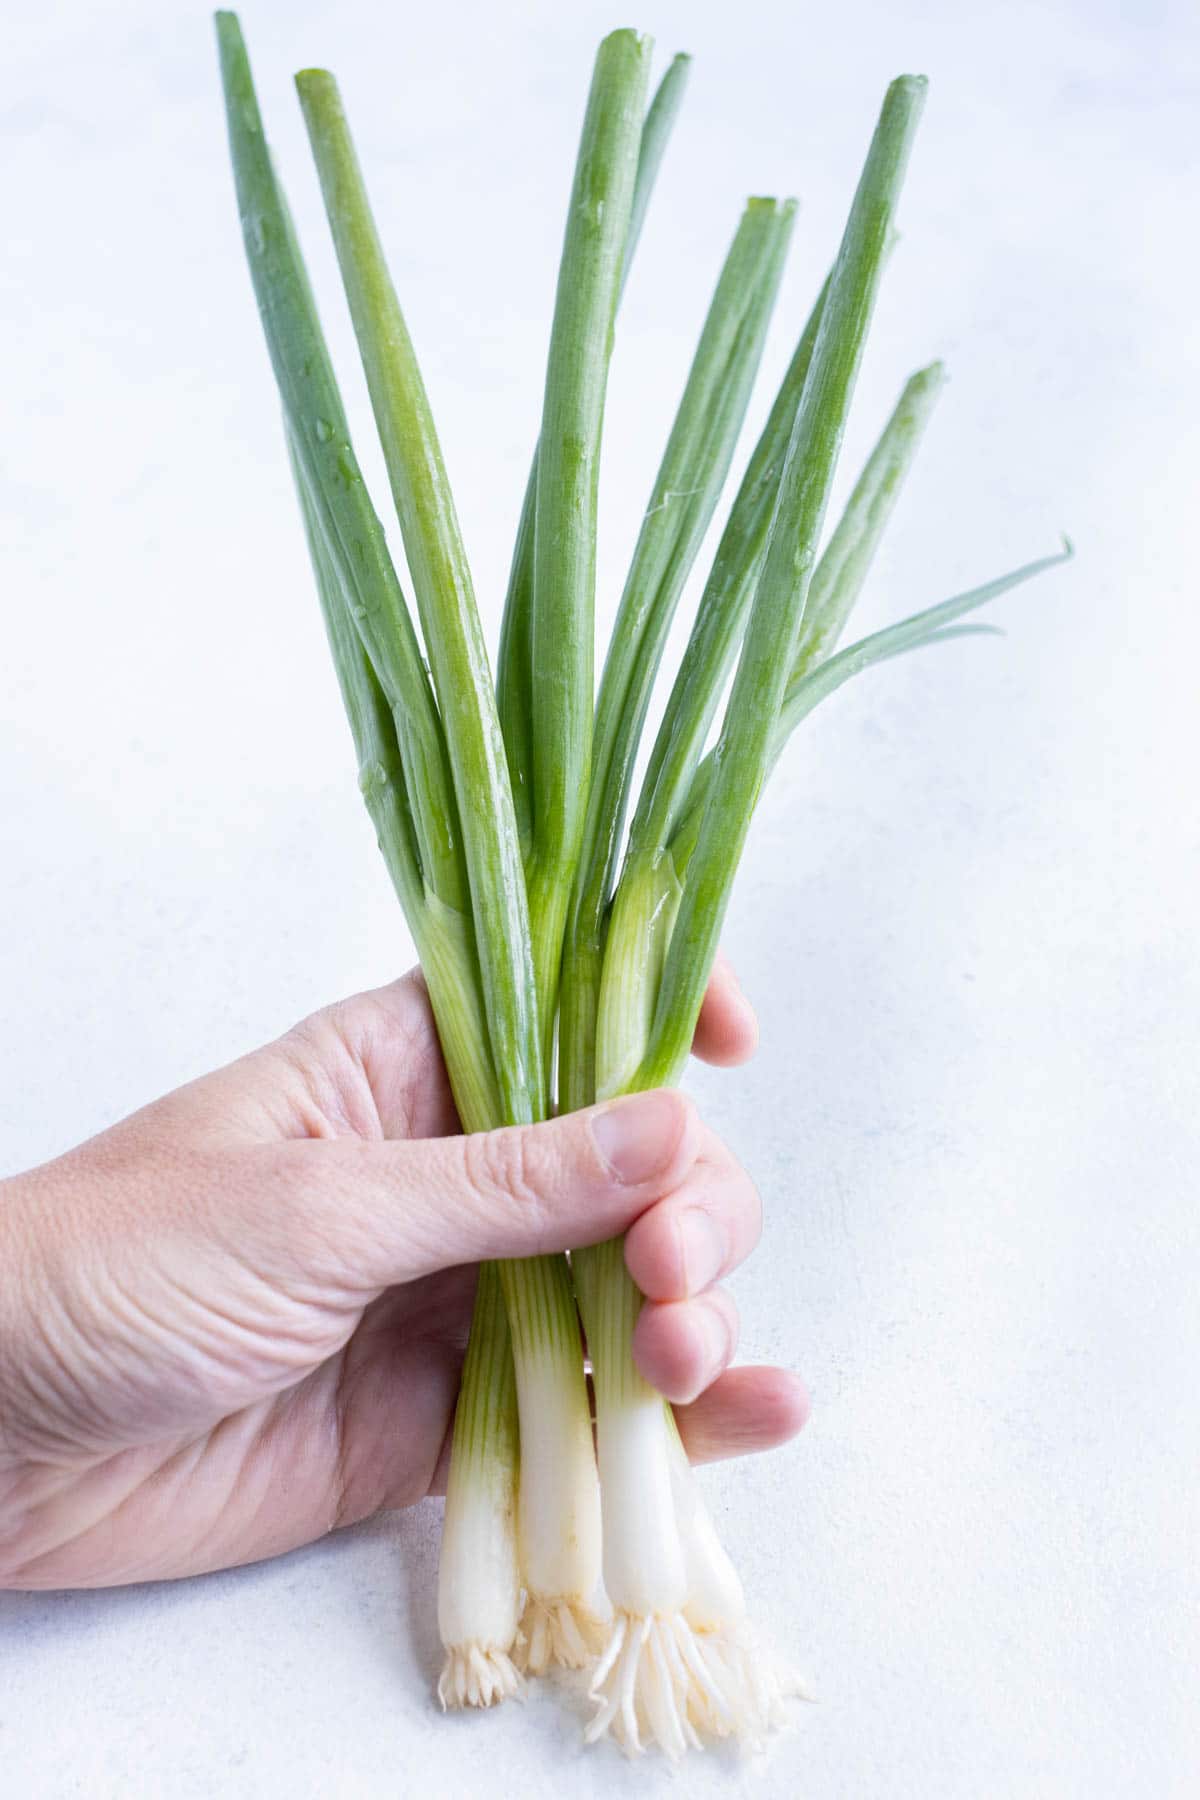 How to Select, Store, Prep, and Chop Scallions